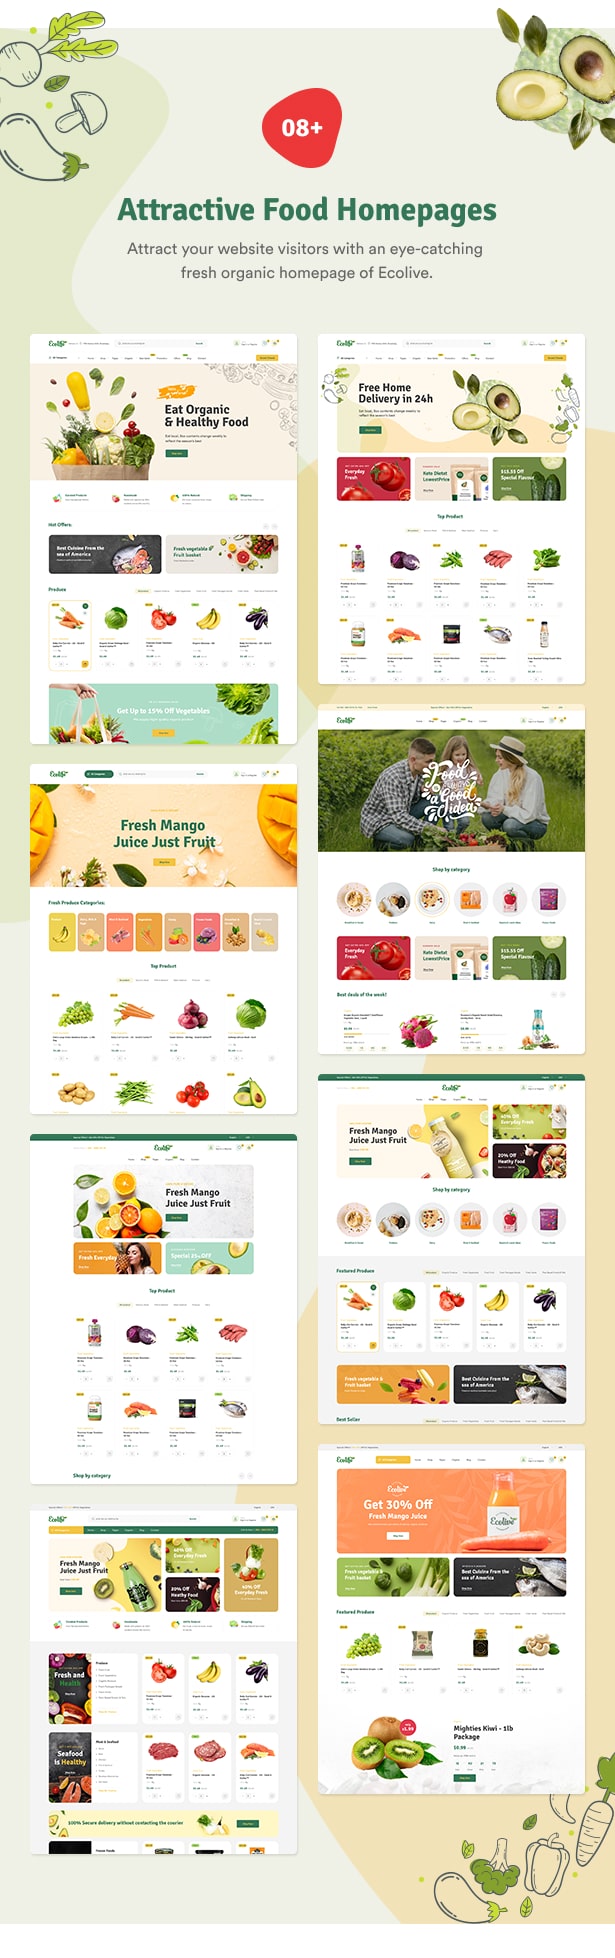 Ecolive - Organic Food WooCommerce WordPress Theme - Attractive Food Homepages